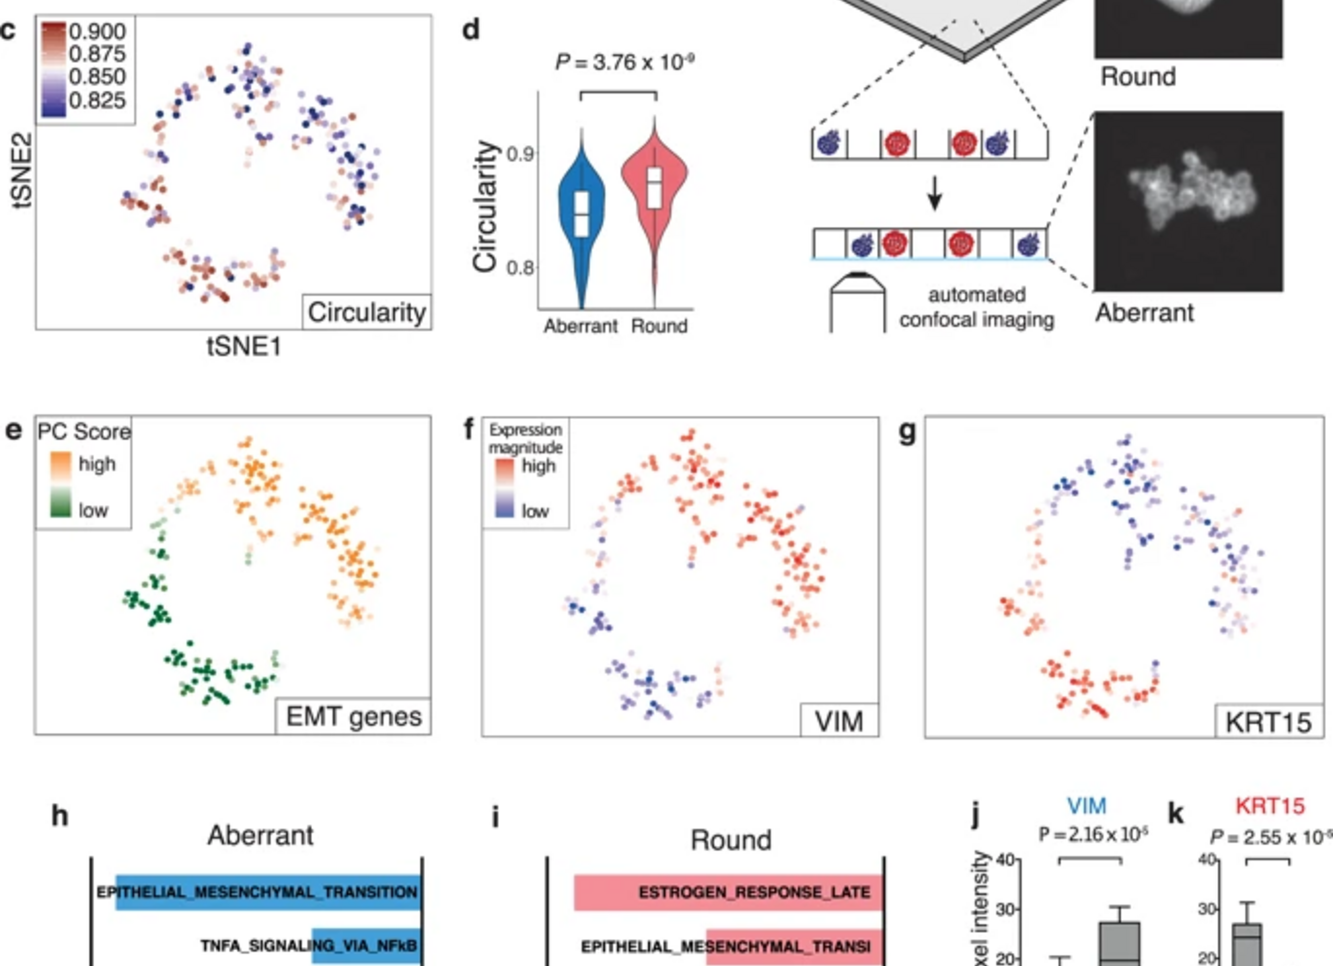 Pheno-seq: Linking visual features and gene expression - 